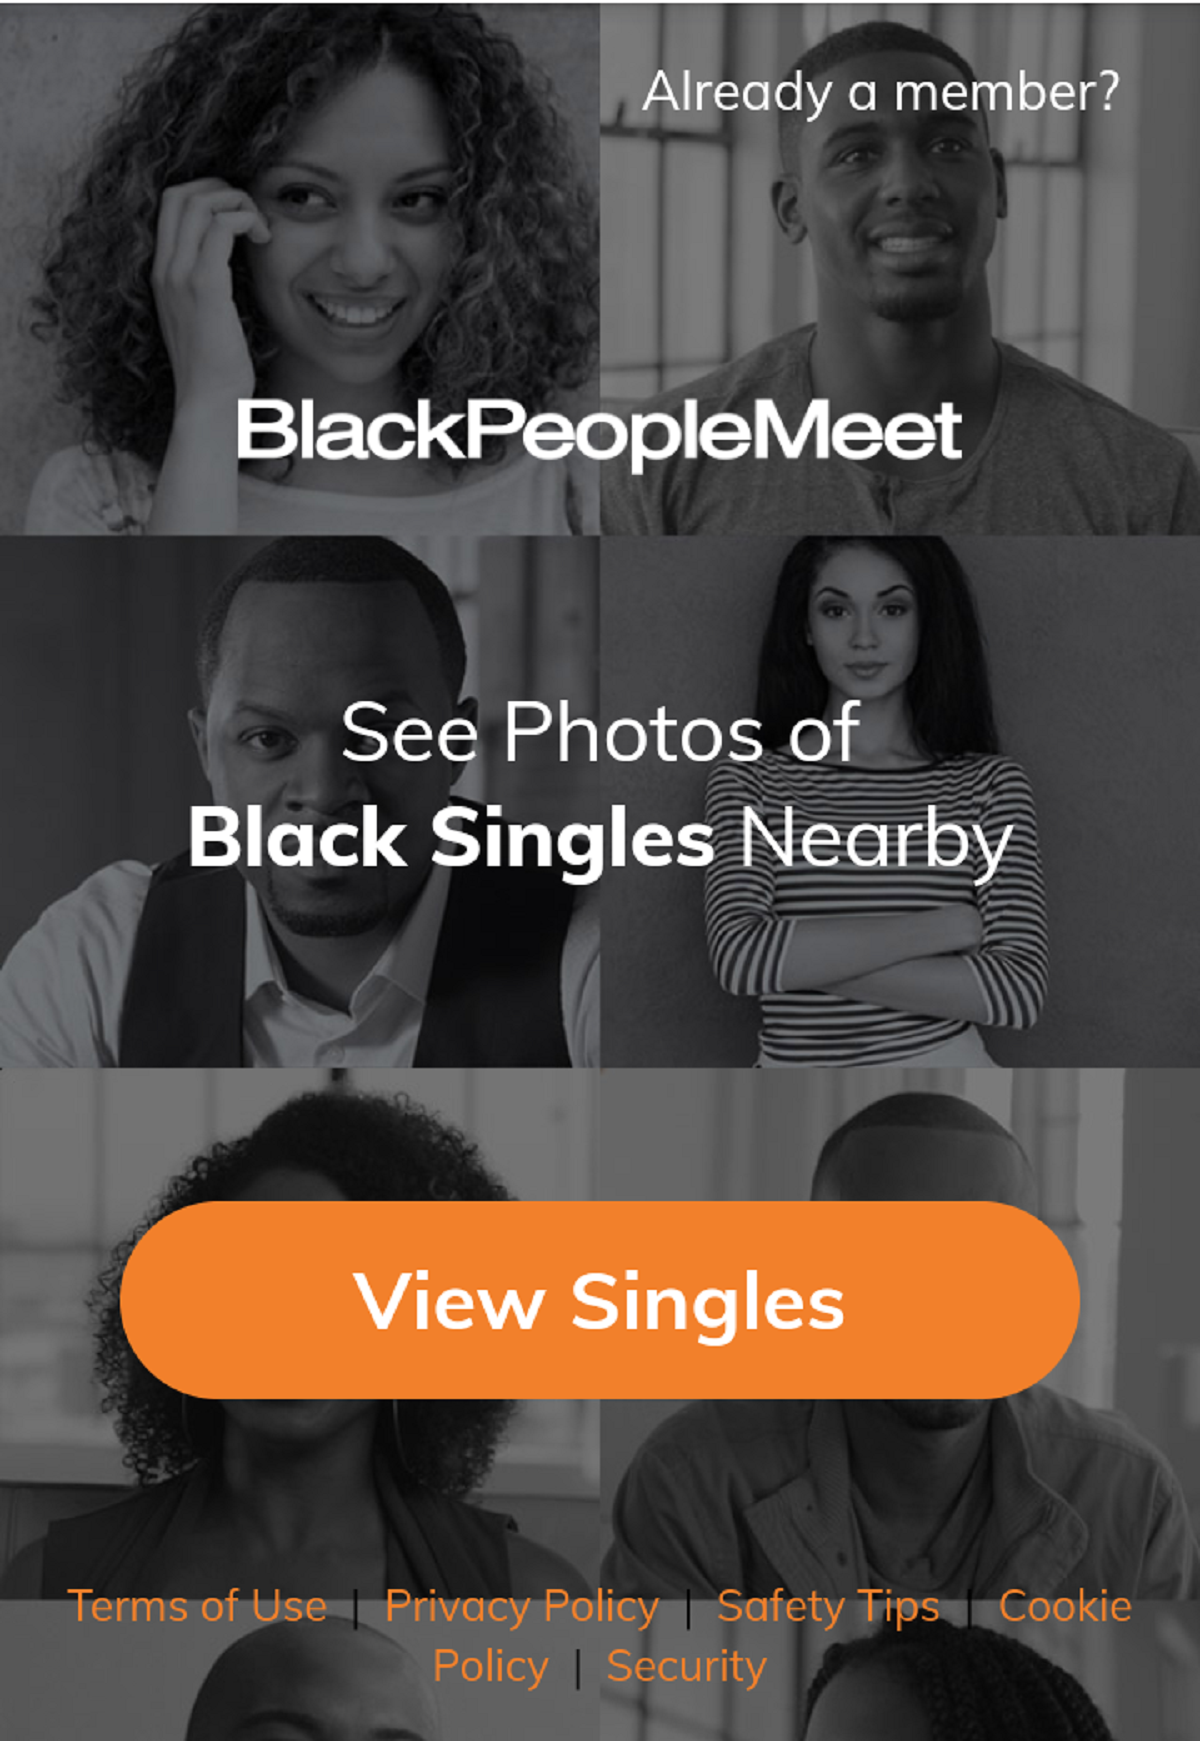 BlackPeopleMeet Review — What Do We Know About It?